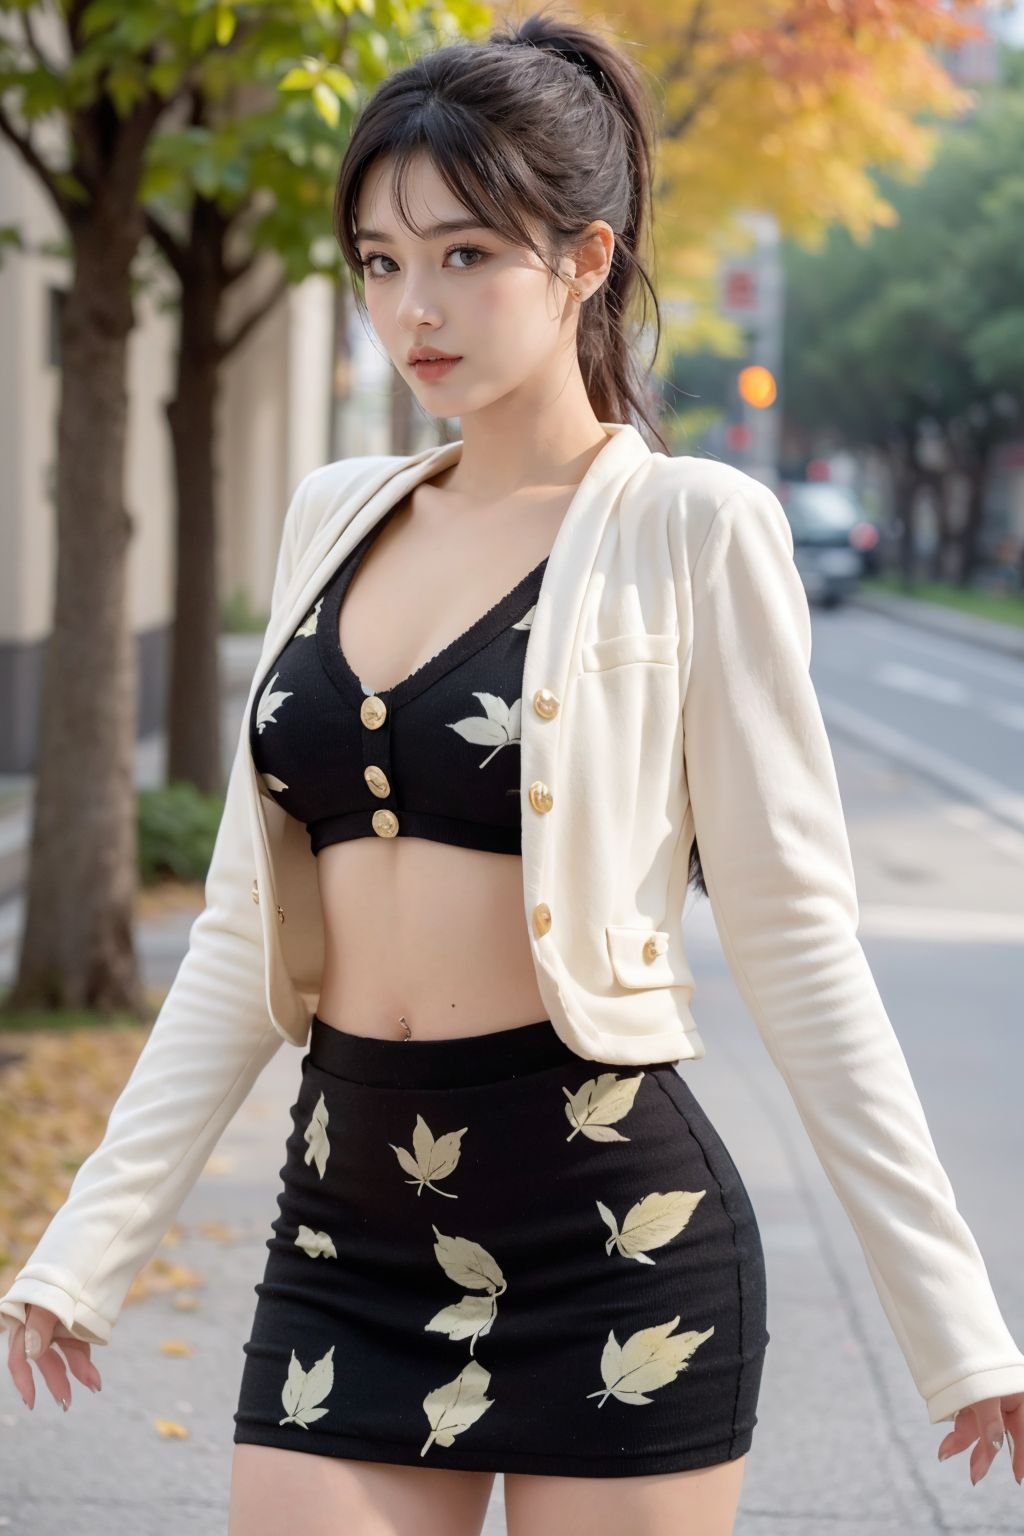 Female, (Big breasts), (Qi bangs, ponytail), (Ancient, Heroine), (velvaura, black bra, midriff, black skirt, ((leaf printed skirt))), golden buttons, cropped jacket, (white jacket), long sleeves, Standing in the street, falling leaves, autumn leaves, warm climate, autumn atmosphere, (long legs), (ring finger diamond ring), full body, looking at the audience, masterpiece, realistic, ((face closeup, face shot)), <lora:10xCocoDress(Majic)_LR5_v1:0.7>